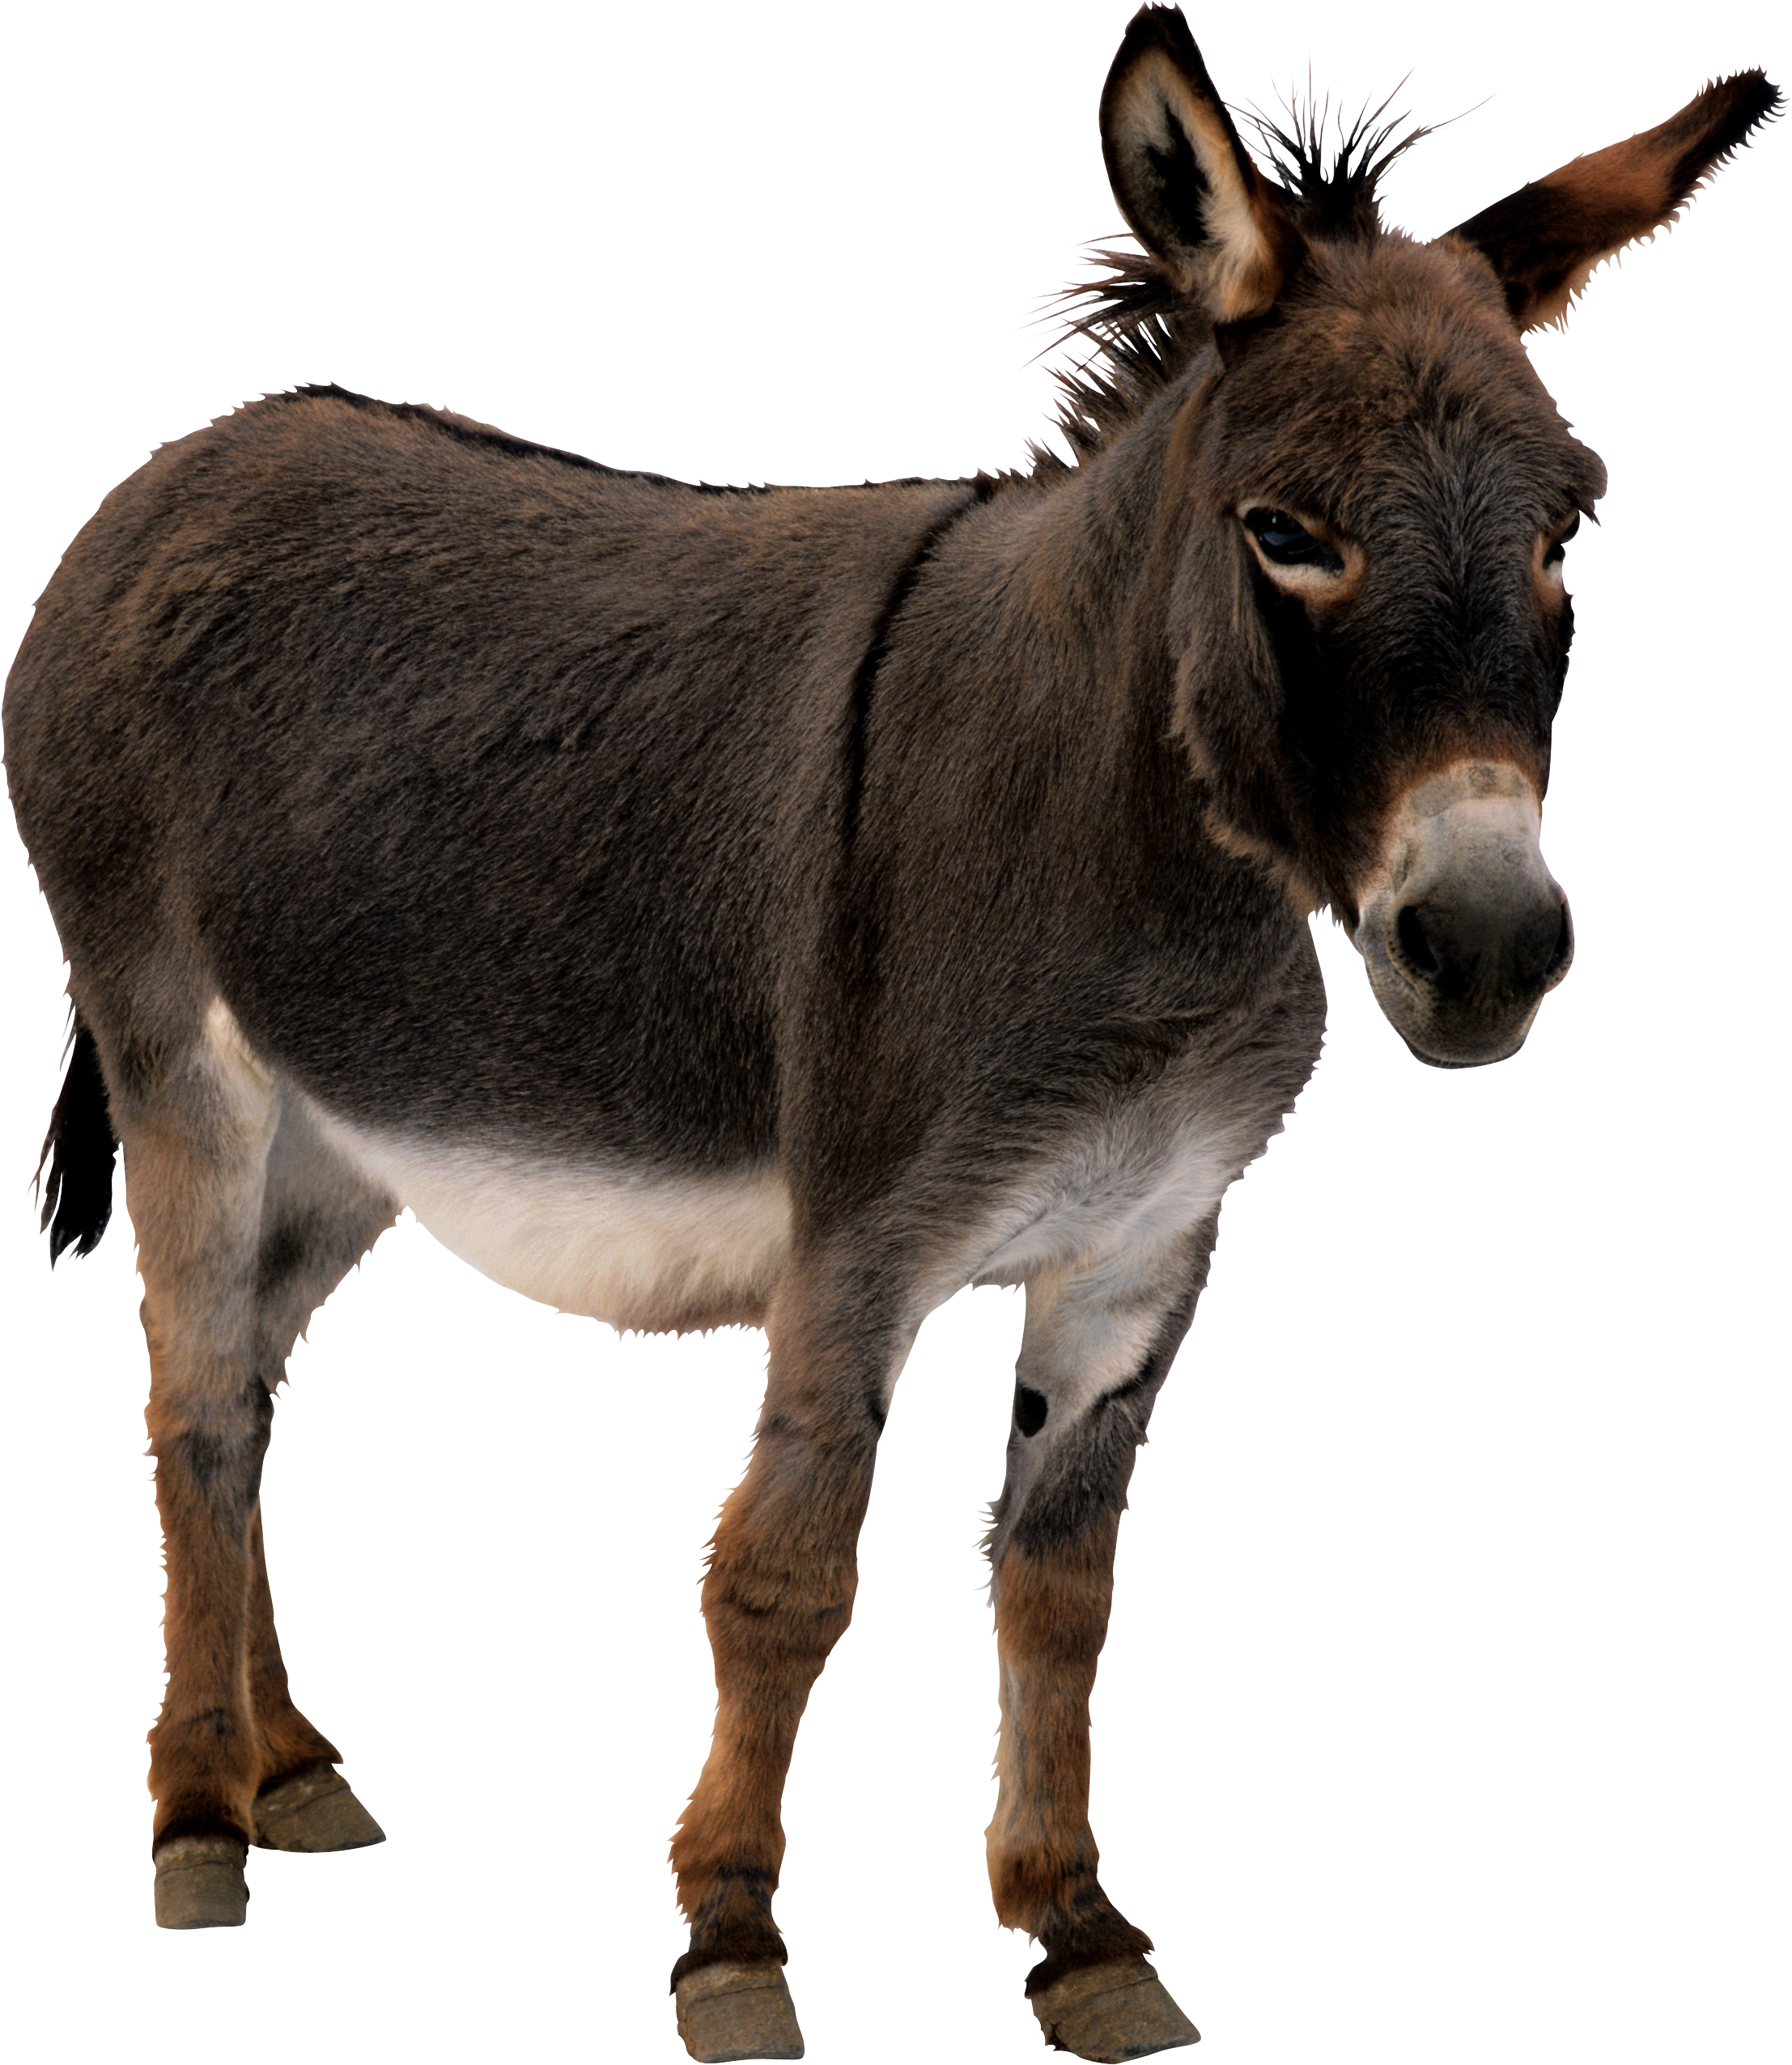 Donkey PNG Transparent Picture